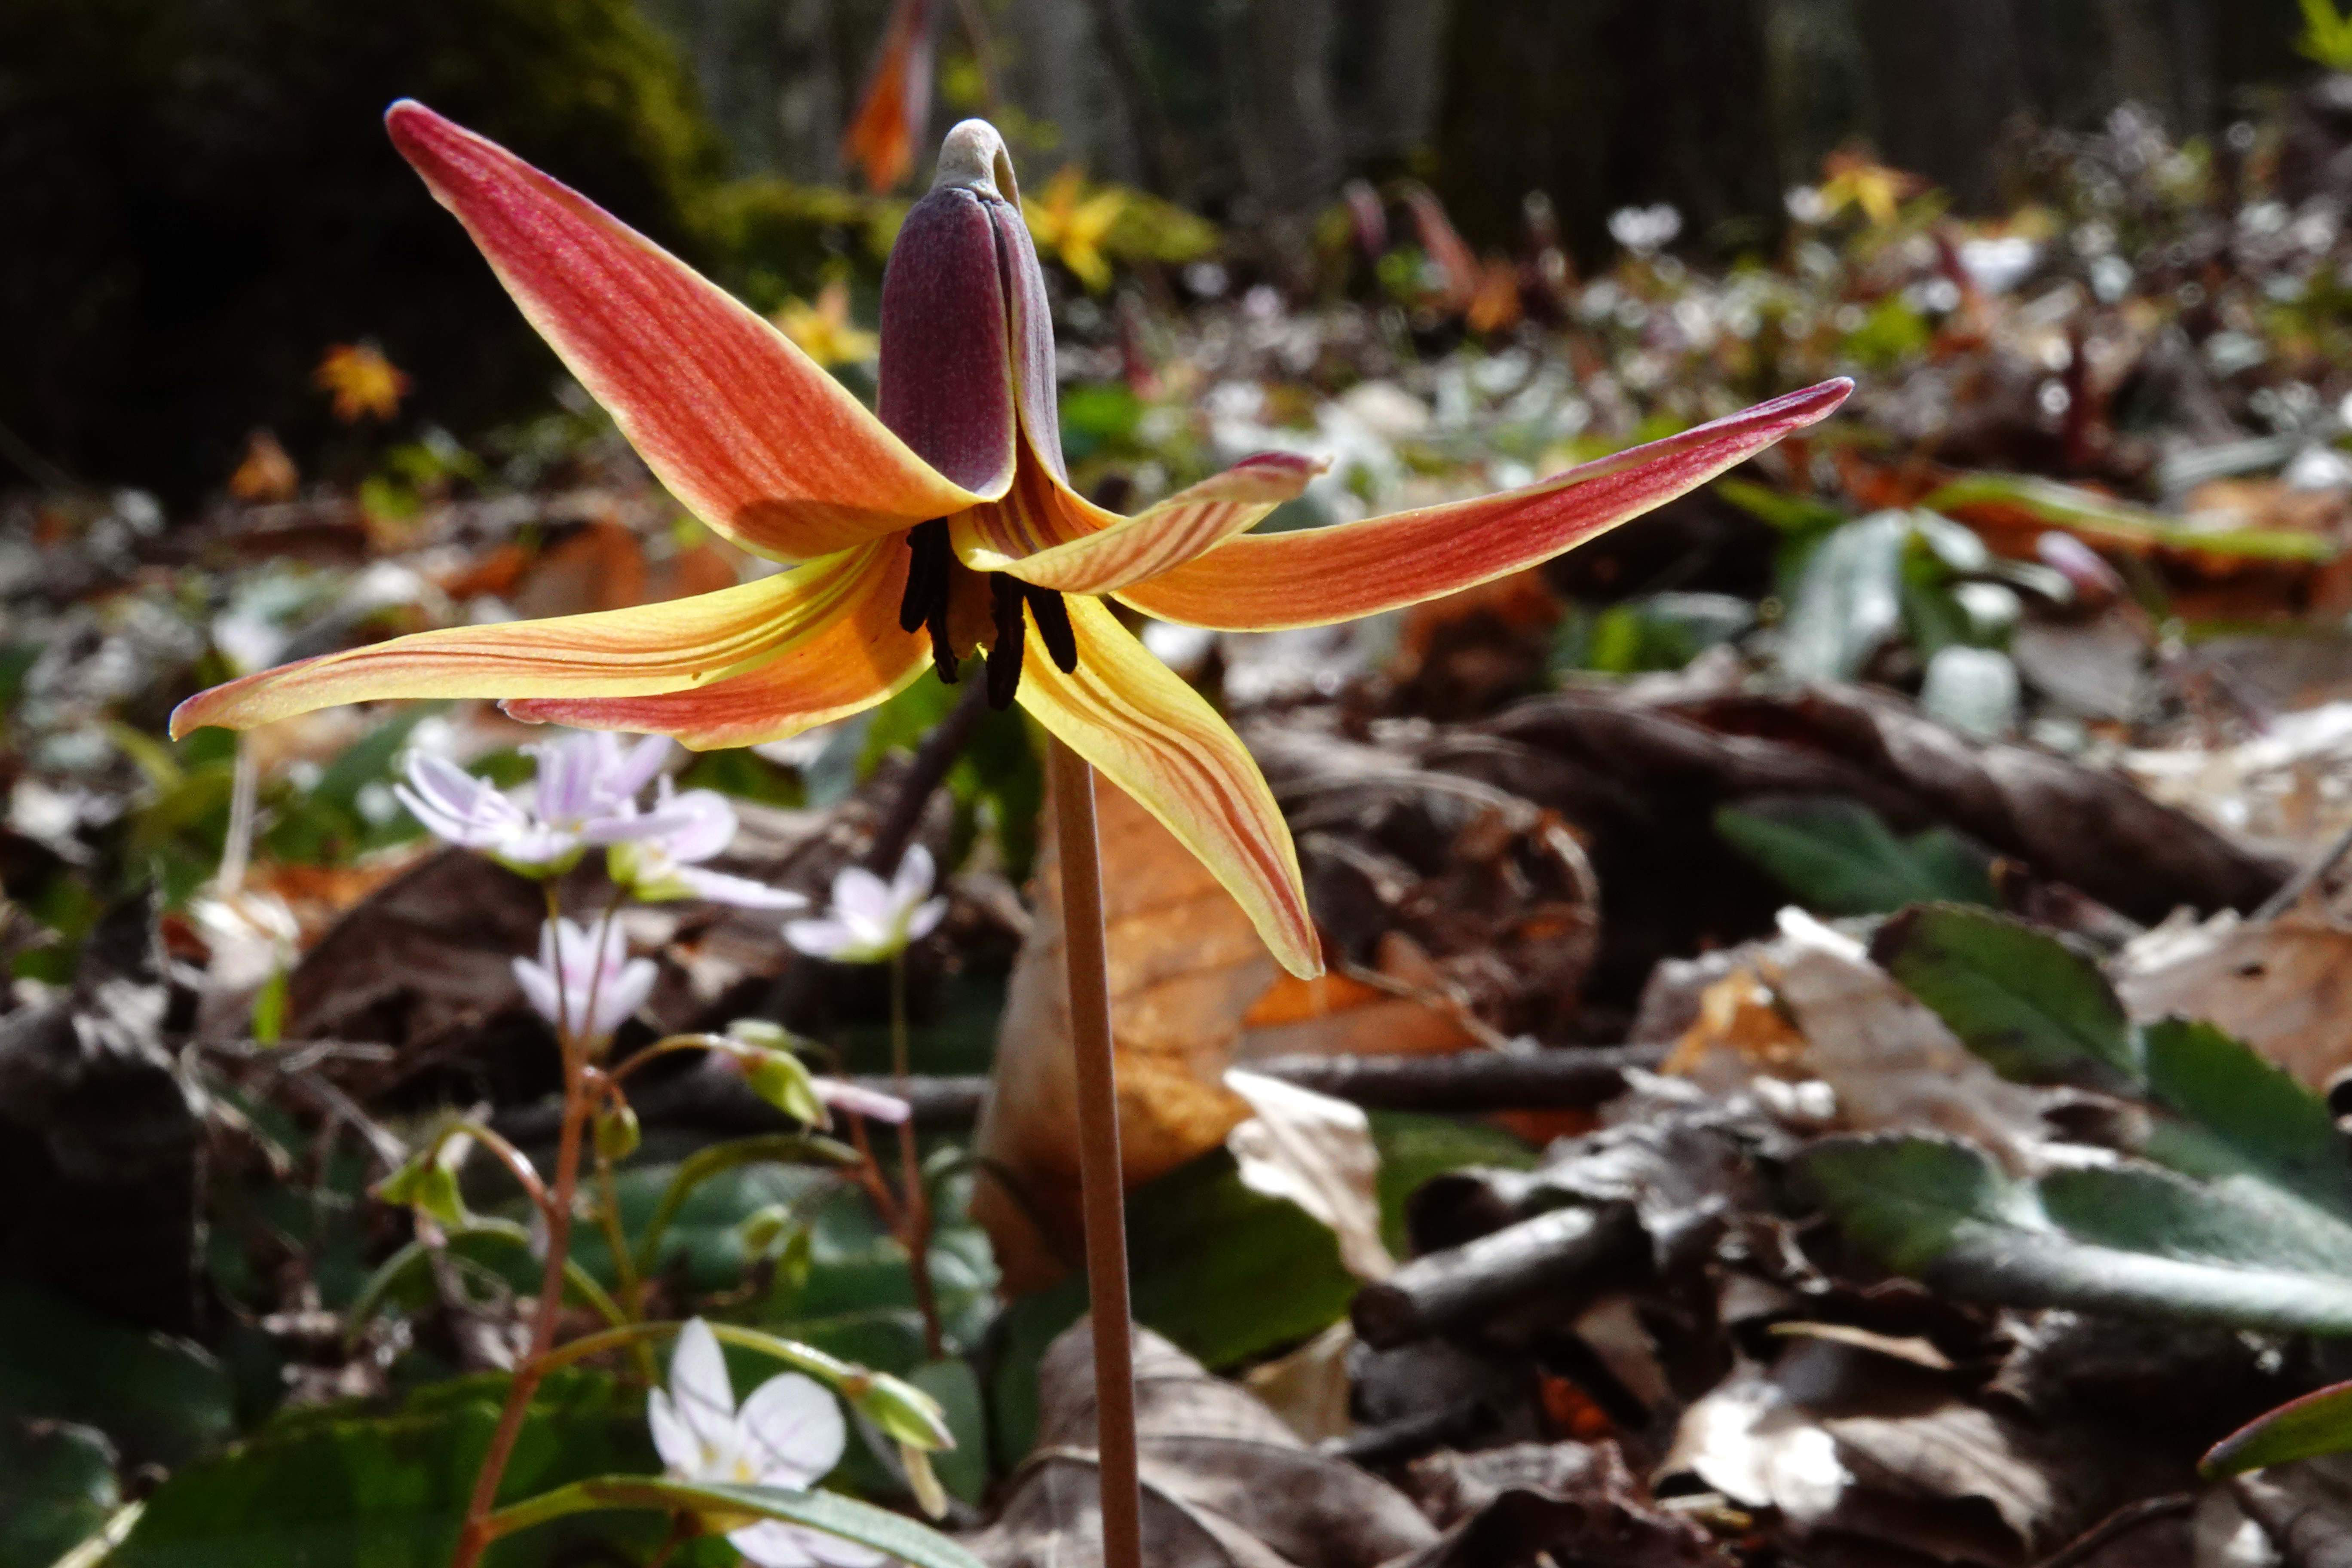 Trout lily  -  Talking Trees Trail, Holmes Educational State Forest, North Carolina